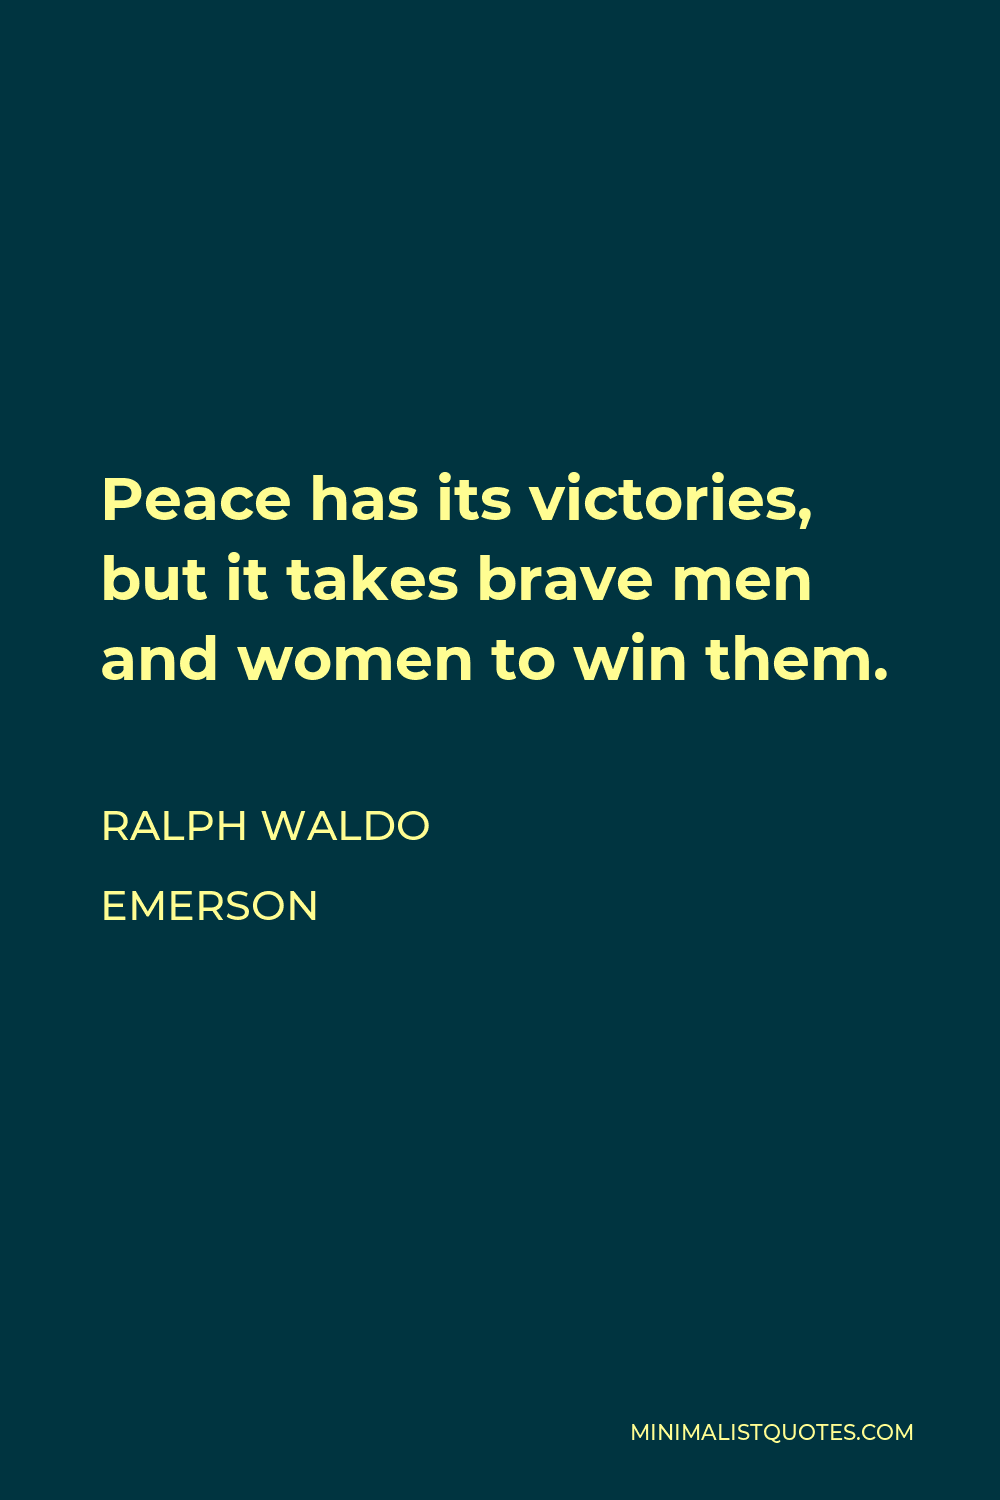 Ralph Waldo Emerson Quote - Peace has its victories, but it takes brave men and women to win them.